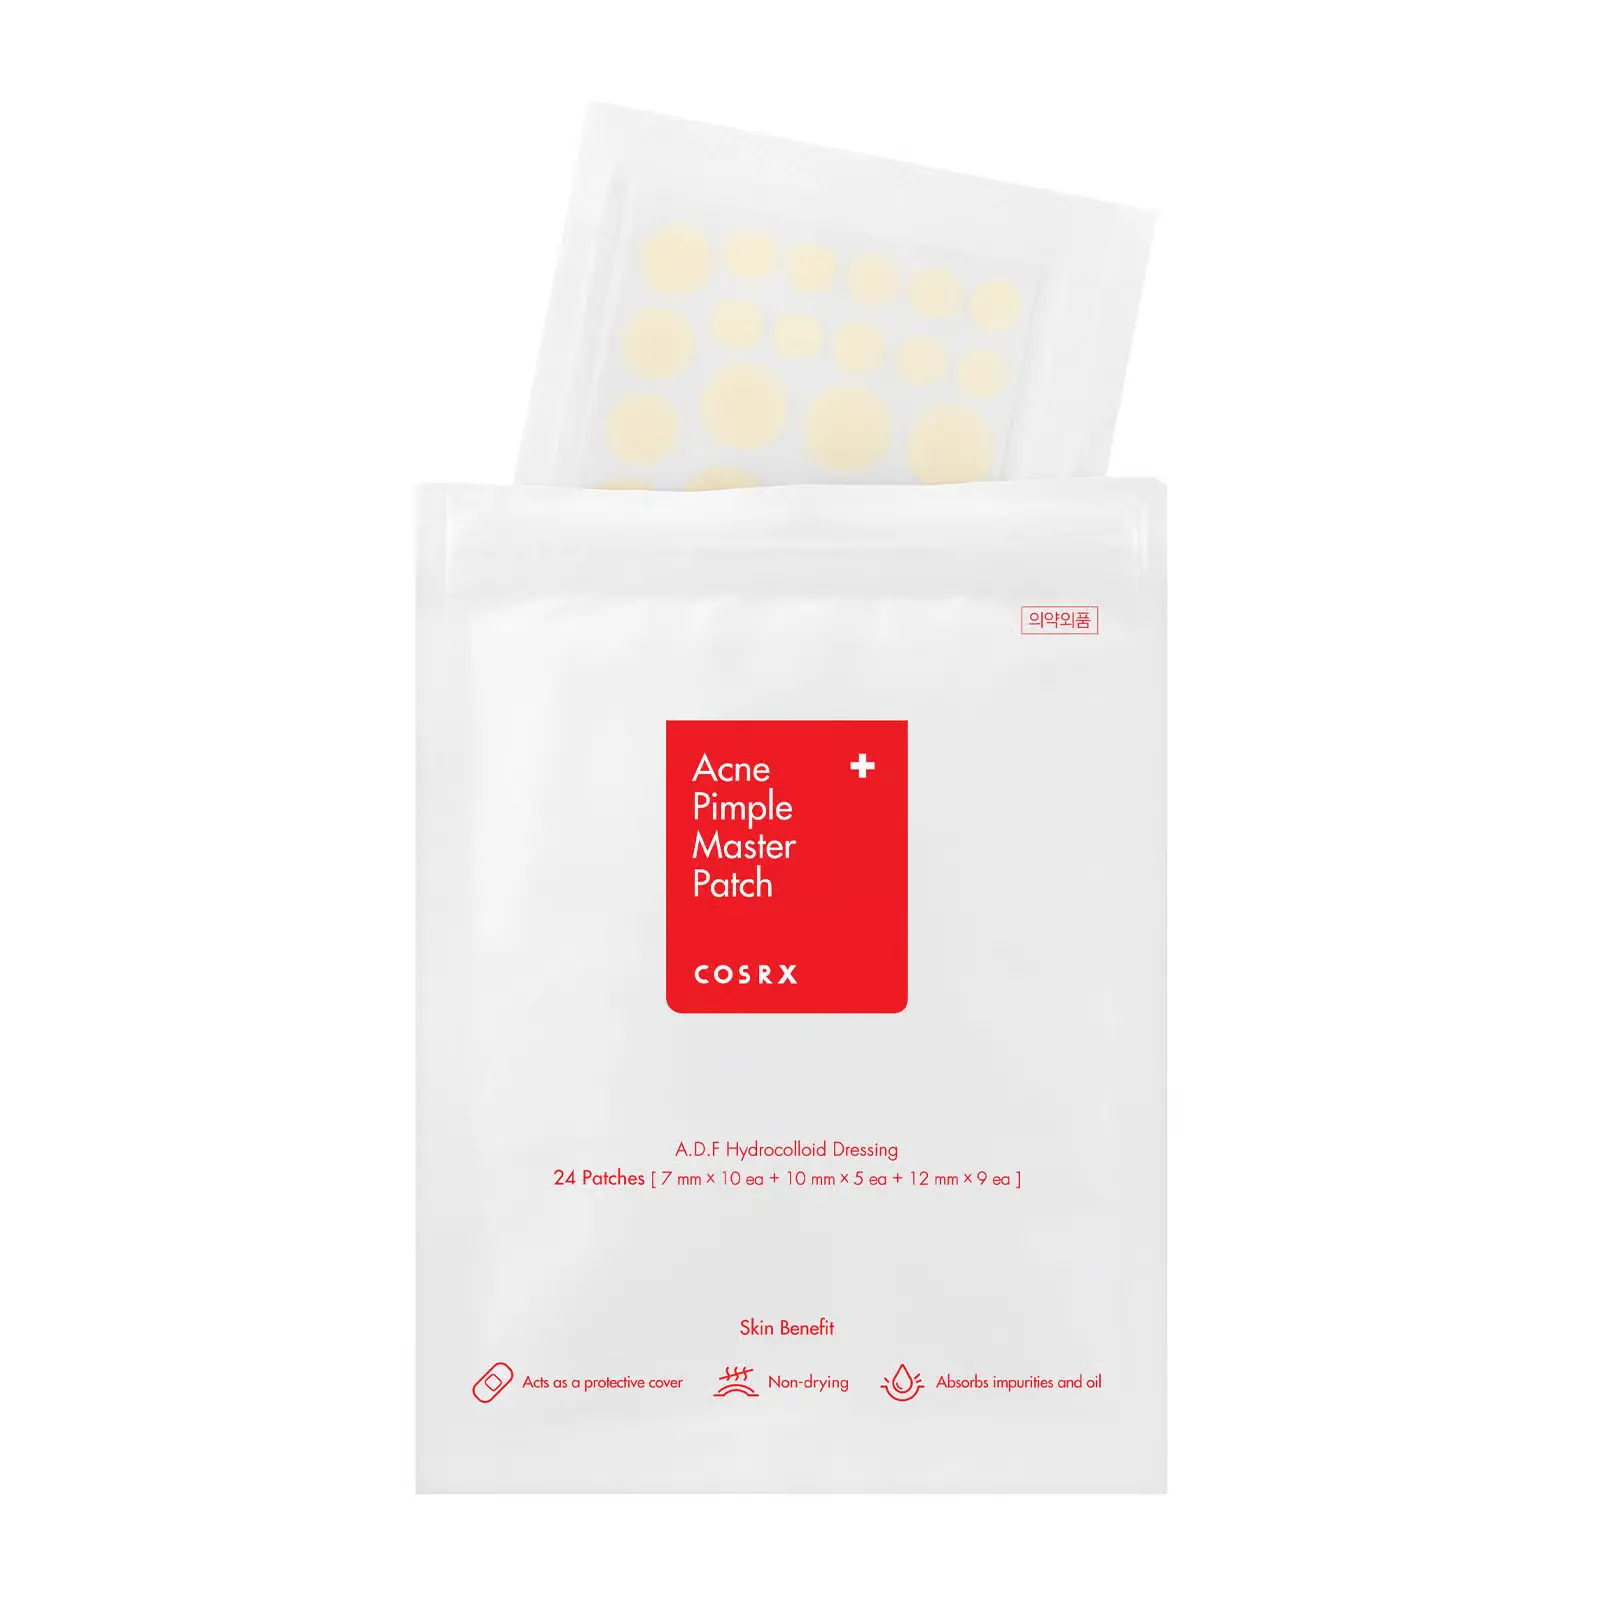 COSRX Acne Pimple Master Patch 24 Patches Discounts and Cashback